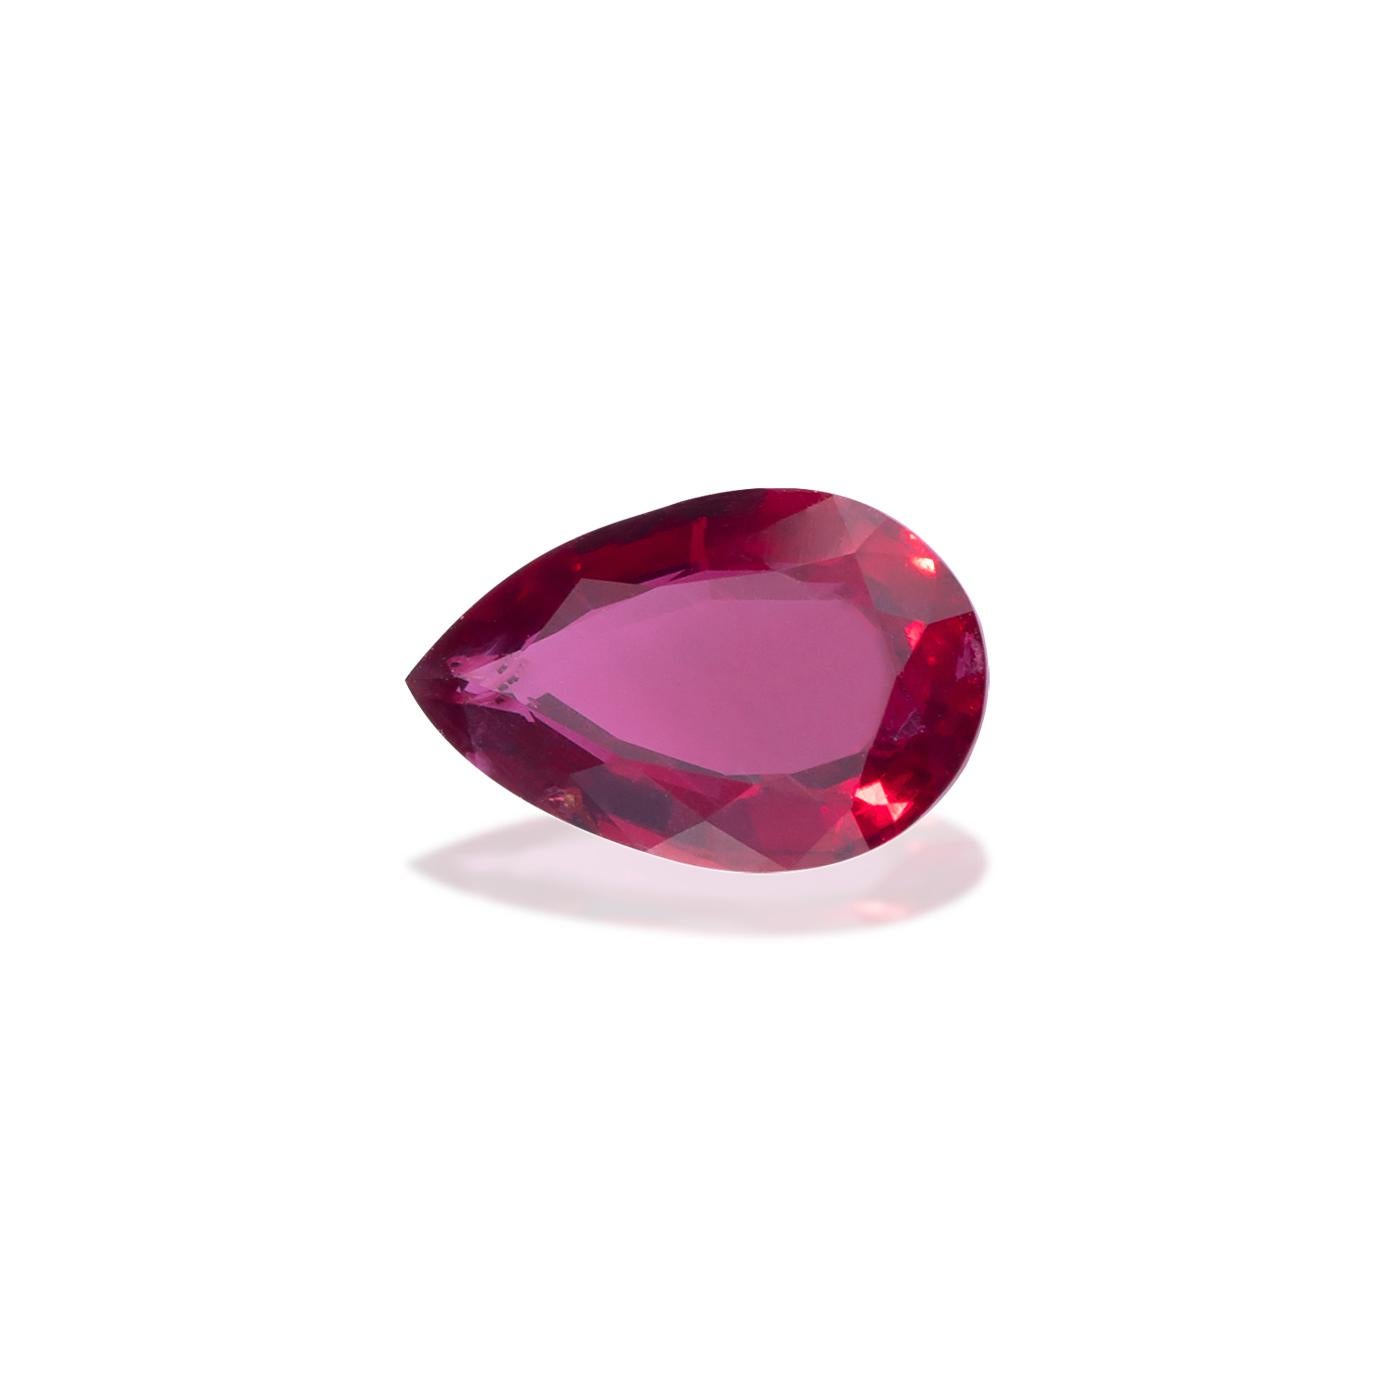 Ruby
Pear Shape
Color Red
Brilliant Cut
Dimension 5.20x8.14x2.67
Weight 1.044 cts.
Country of Origin Mozambique

GEM RARITY: UNEARTHLY THE RAREST GEM

Witness the unique journey of colored gemstones, experience a new level of iconic statements and